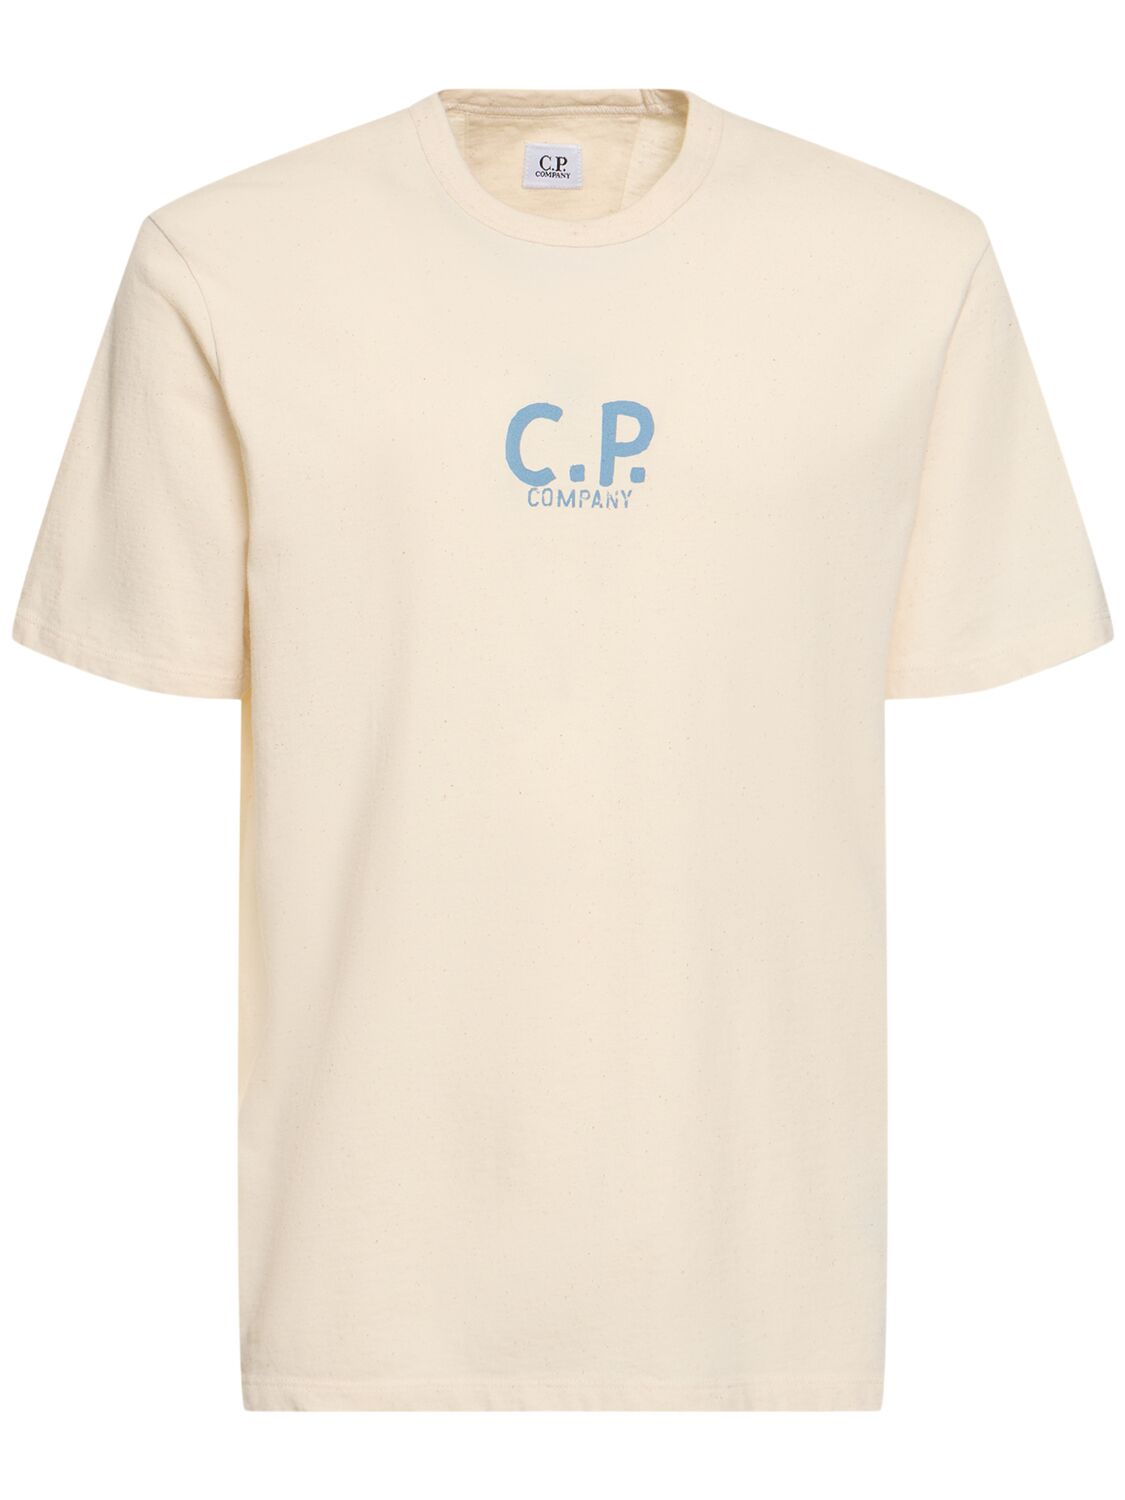 C.p. Company Natural T-shirt In Neutral